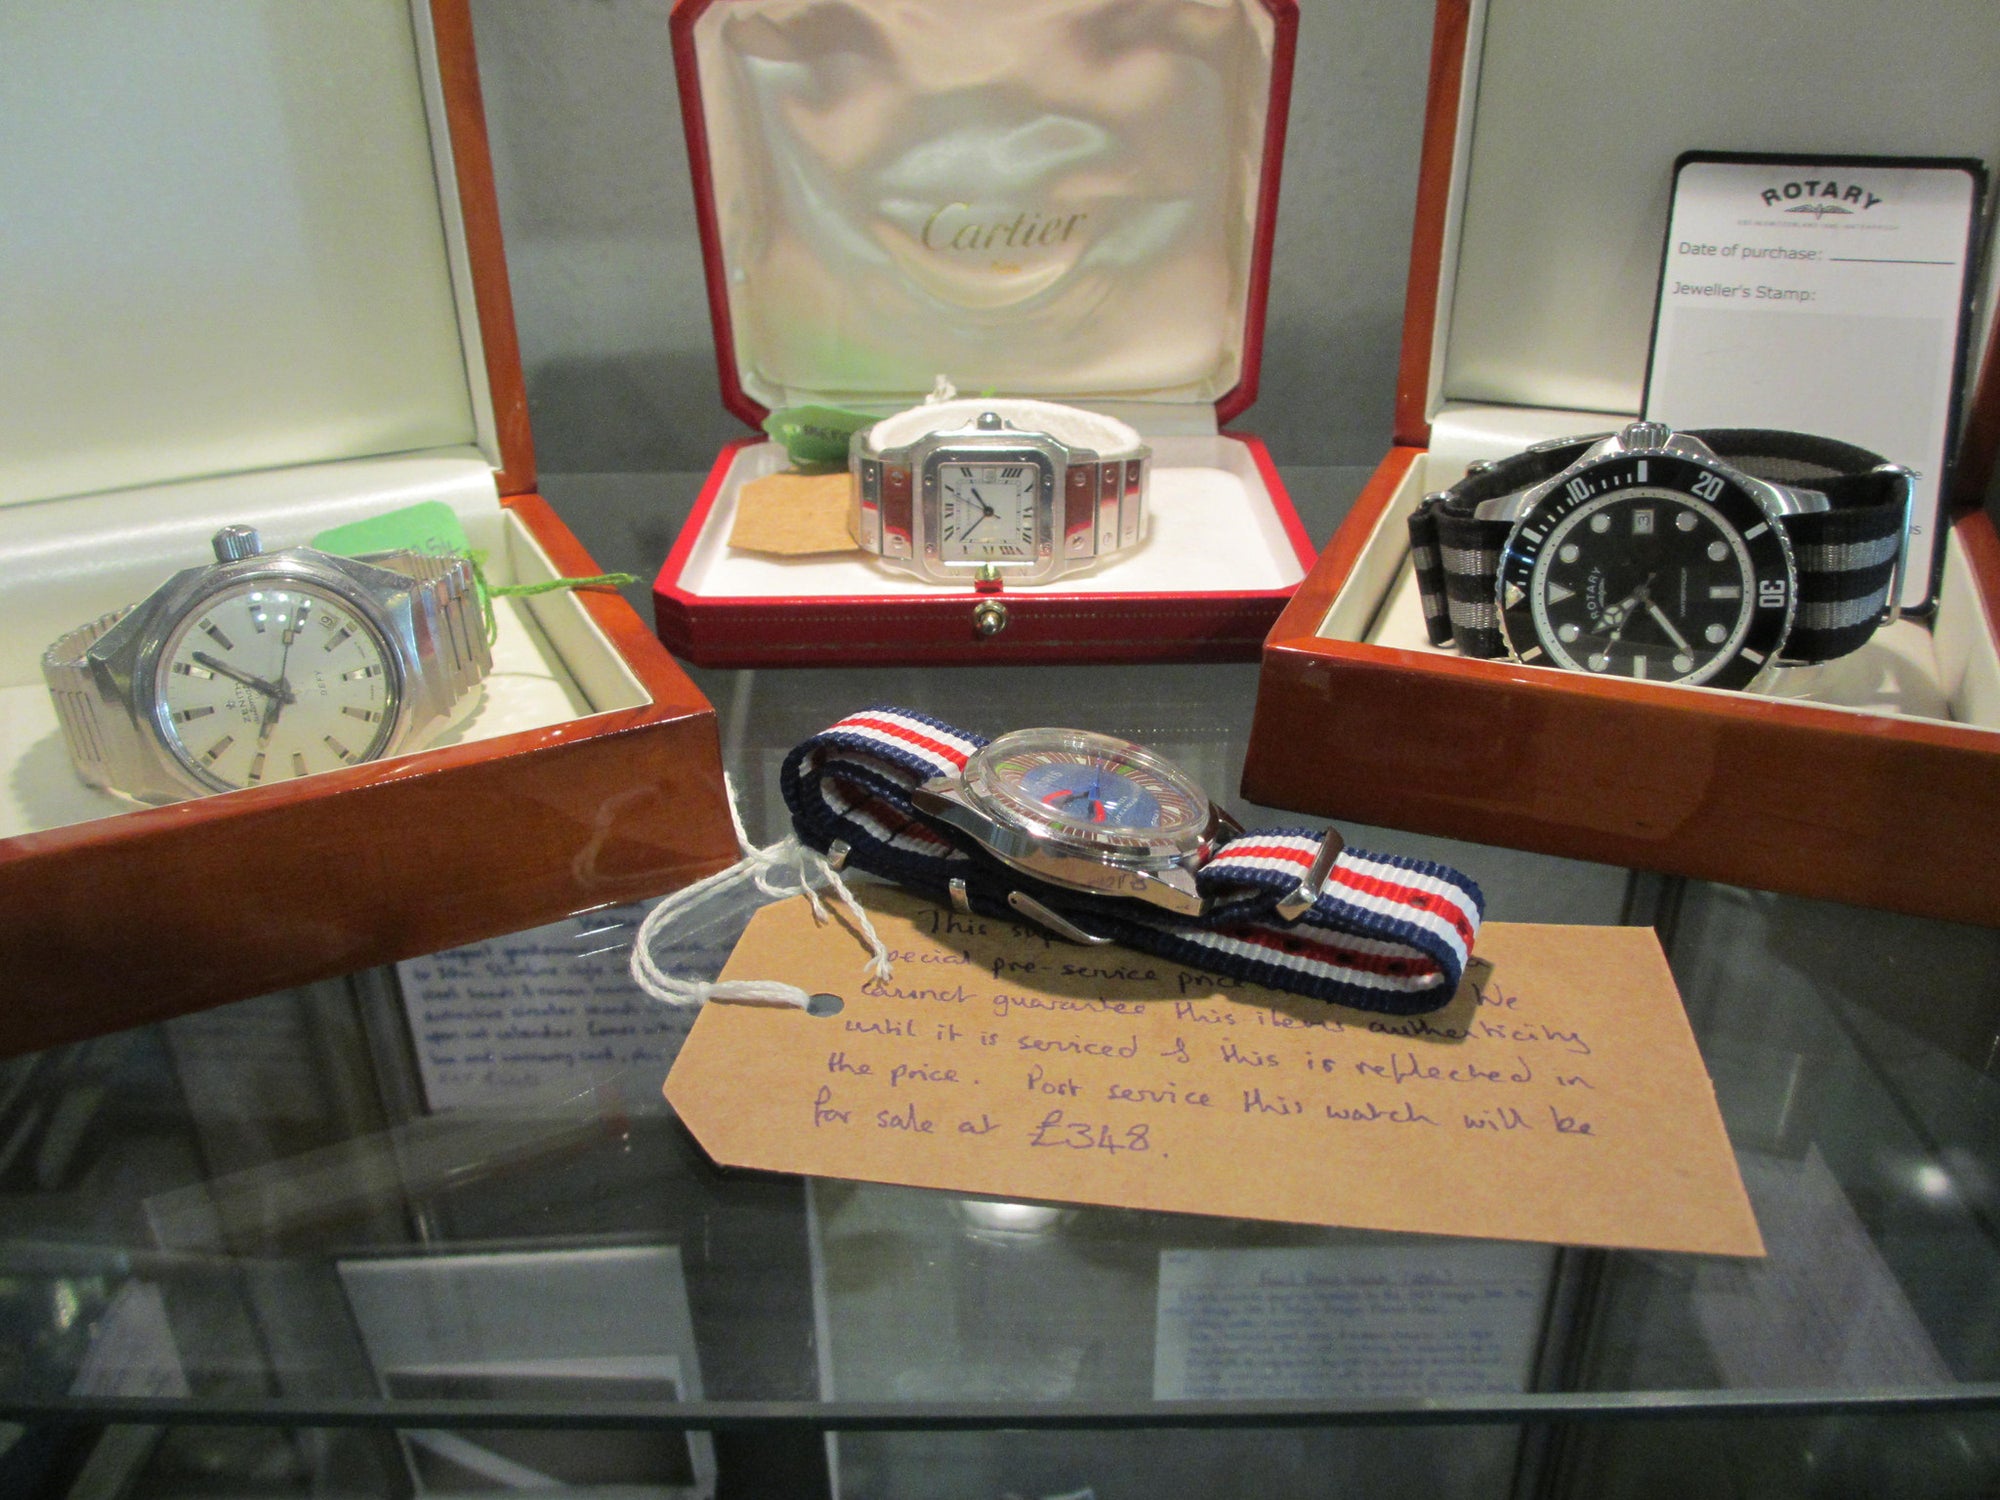 Vintage Wristwatches available at Top Banana.